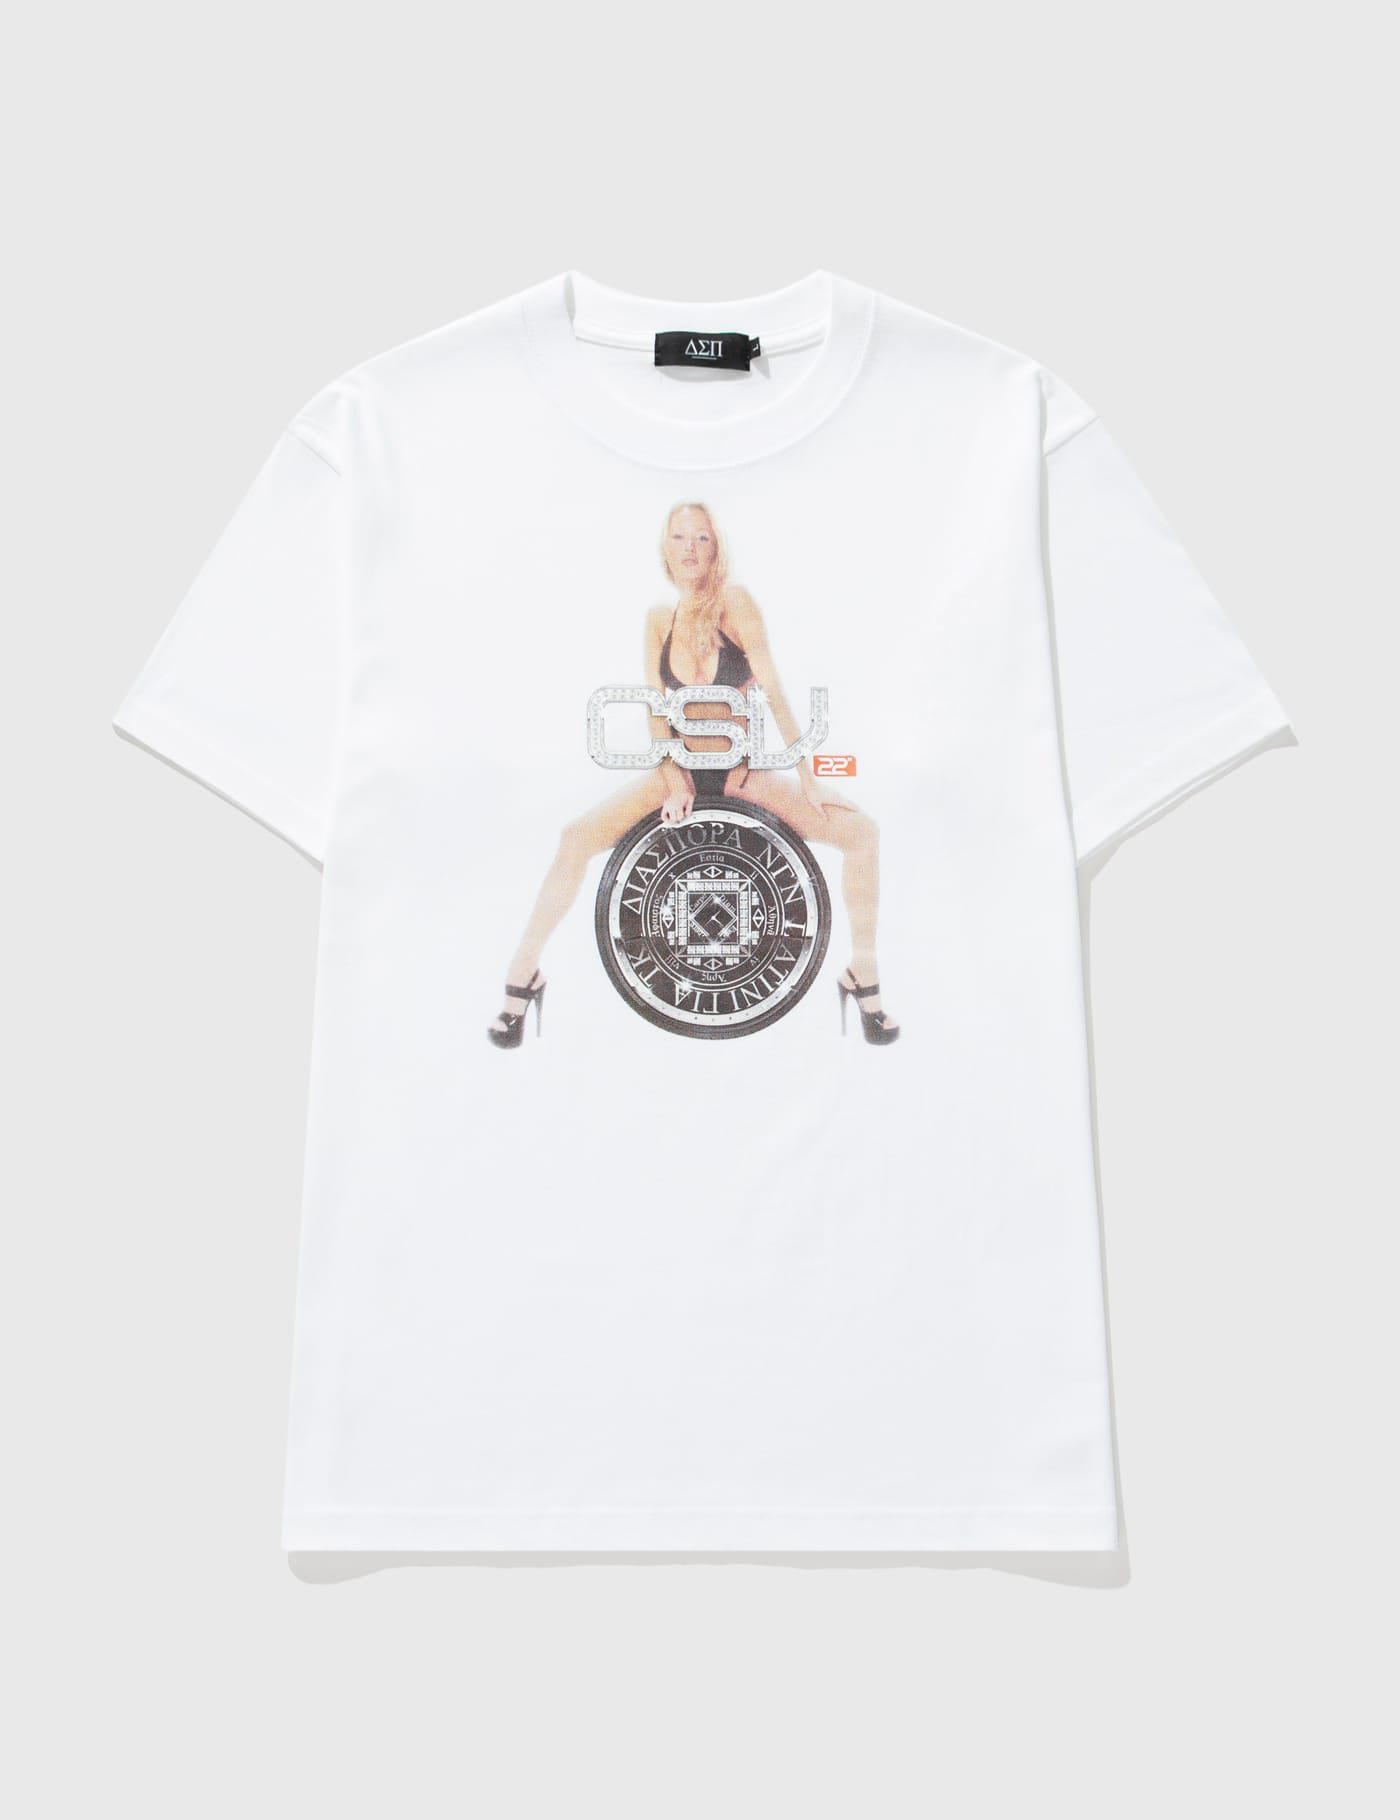 CarService Pinup T-shirt